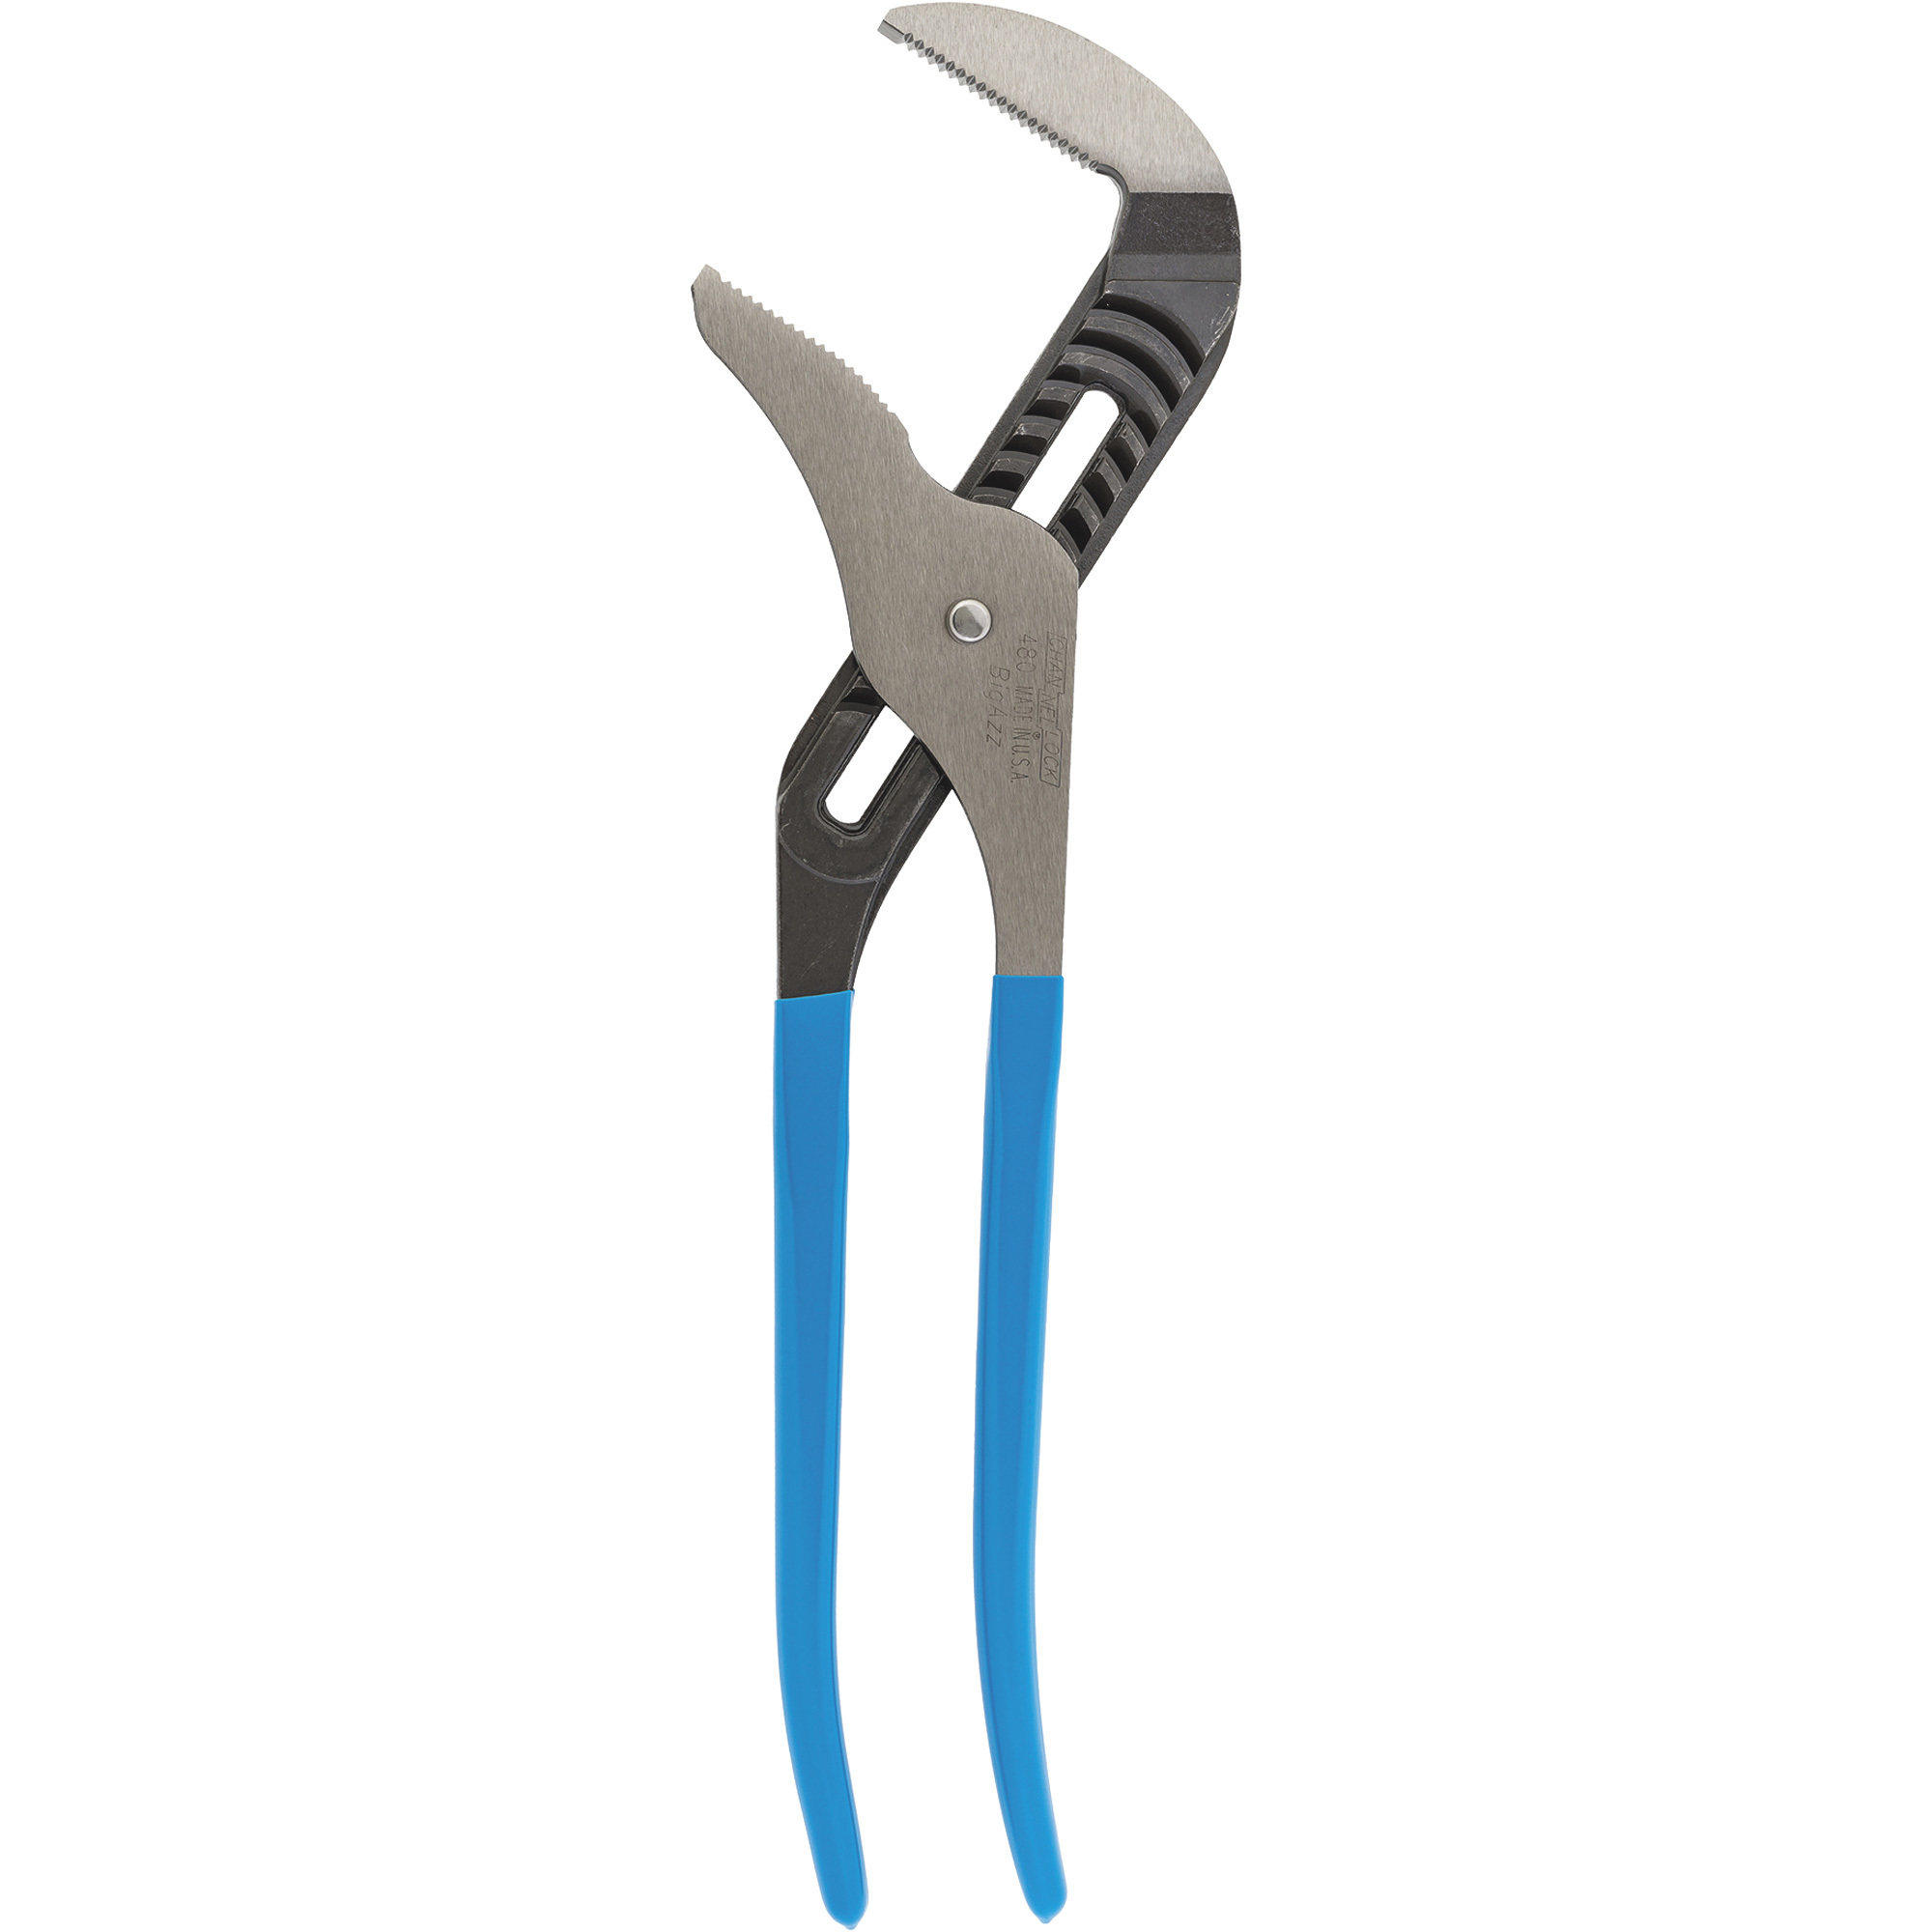 "Channellock 20 1/4Inch Tongue & Groove ""Big Azz"" Pliers"